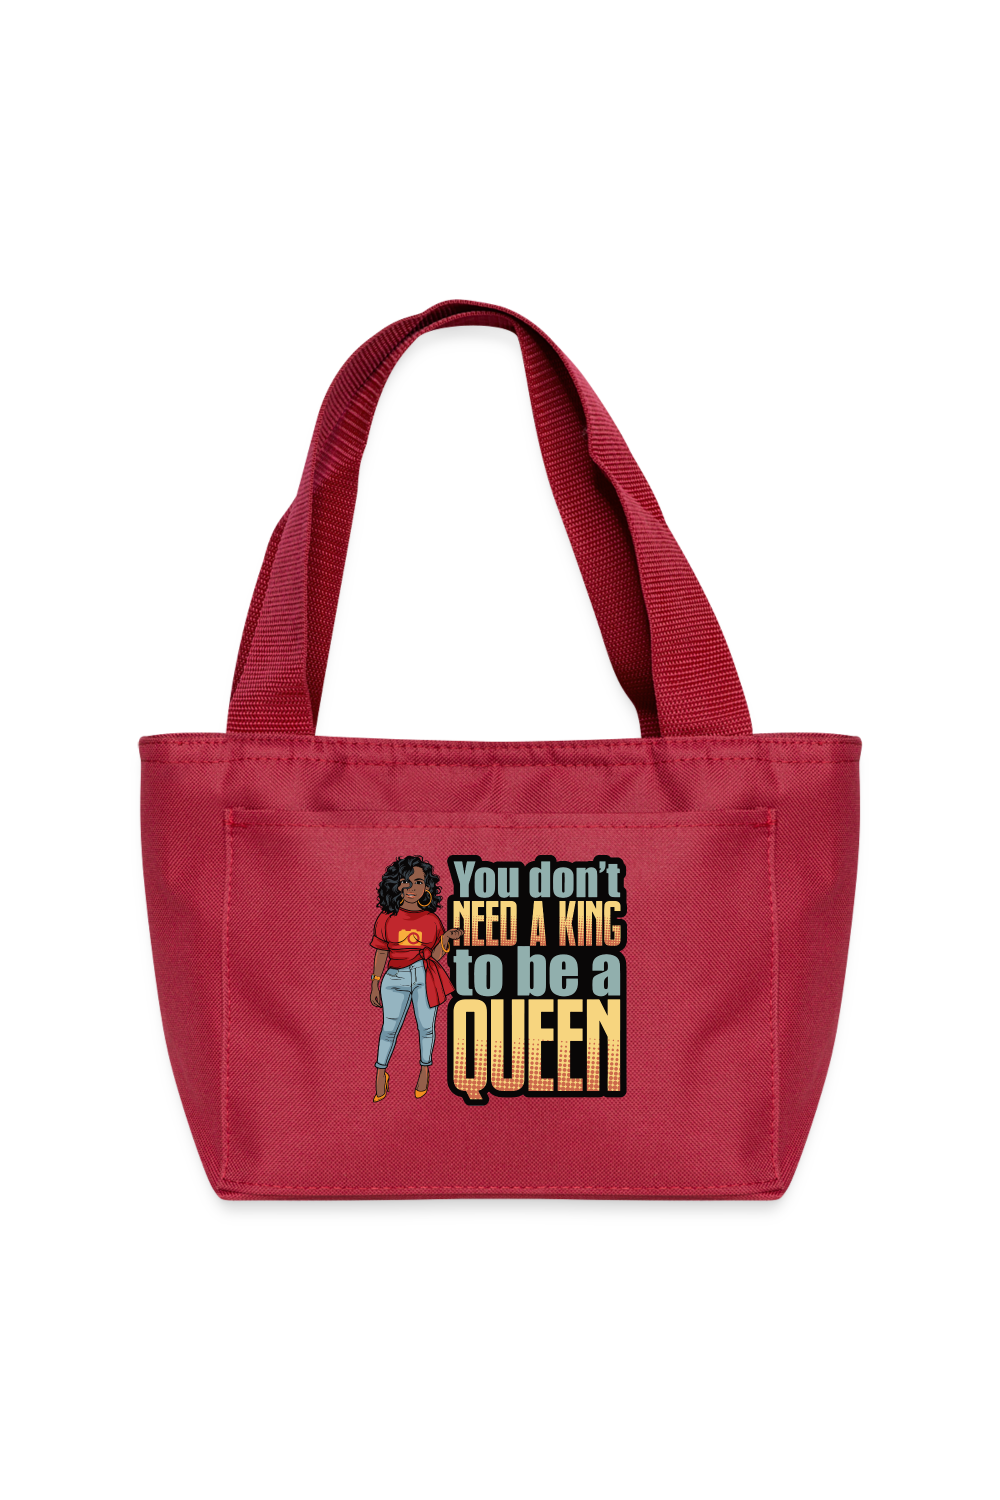 Women You Don't Need a King To Be a Queen Lunch Bag - red - NicholesGifts.online